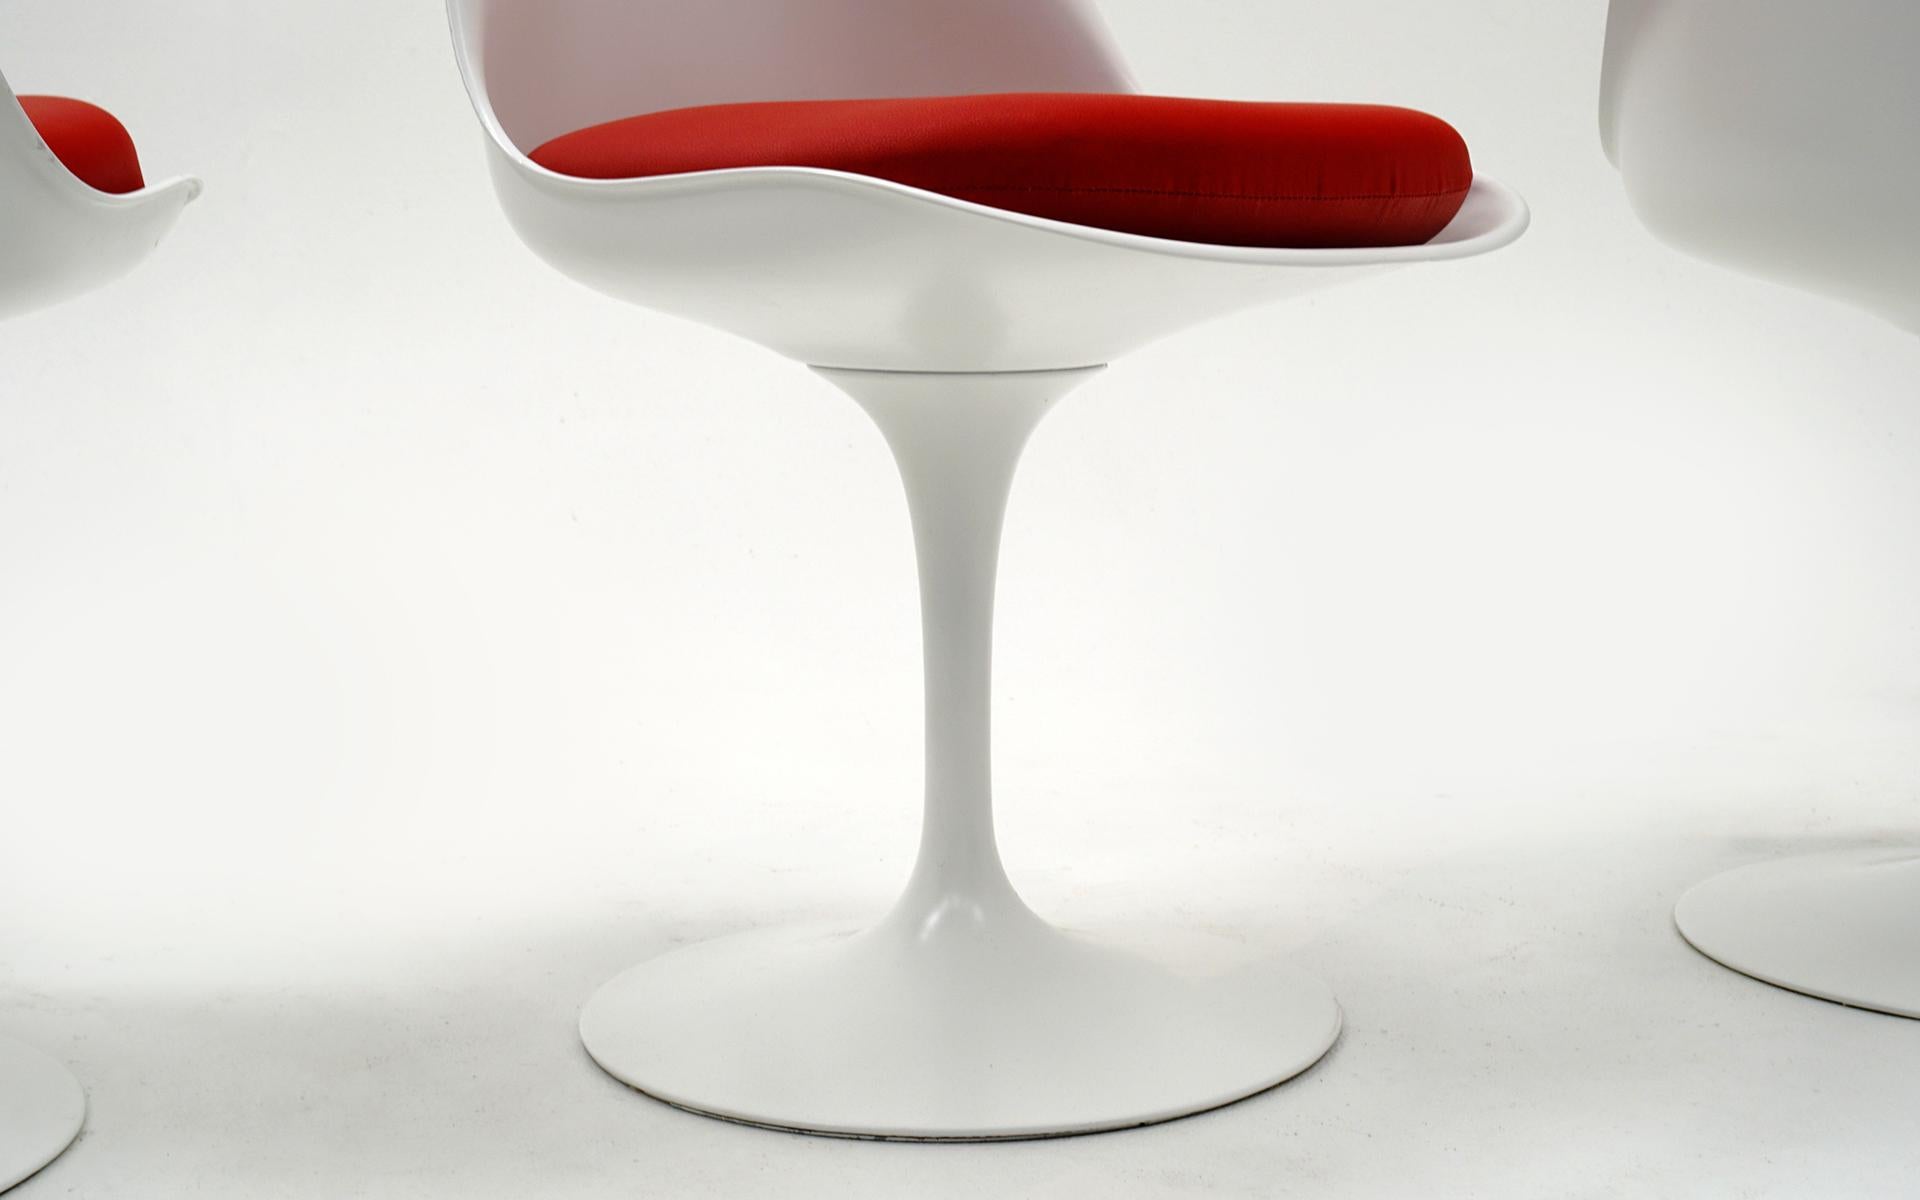 Upholstery Four Eero Saarinen for Knoll Tulip Swivel Dining Chairs, White, Red, Excellent